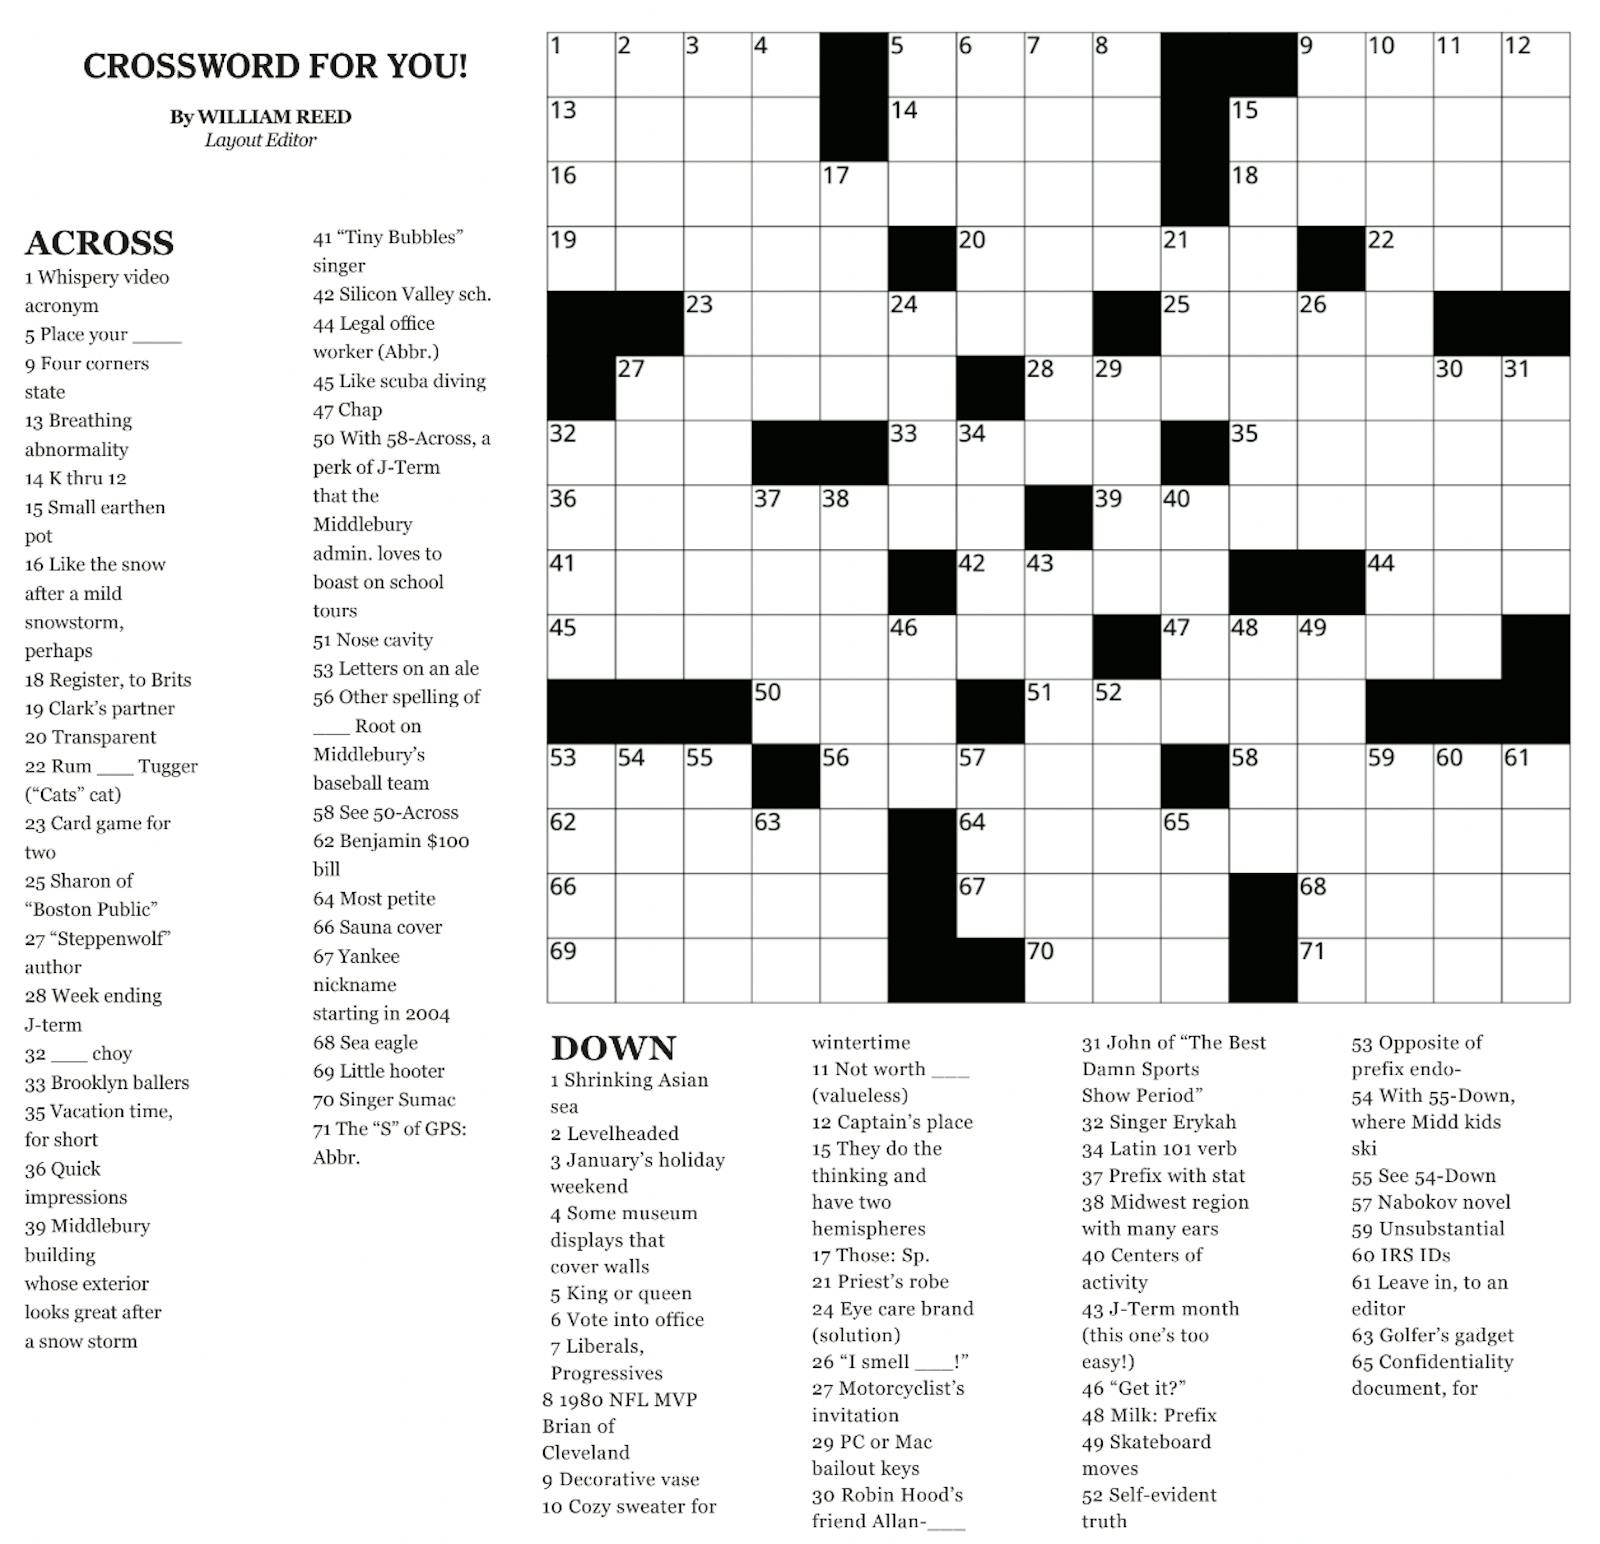 JTerm Crossword! The Middlebury Campus